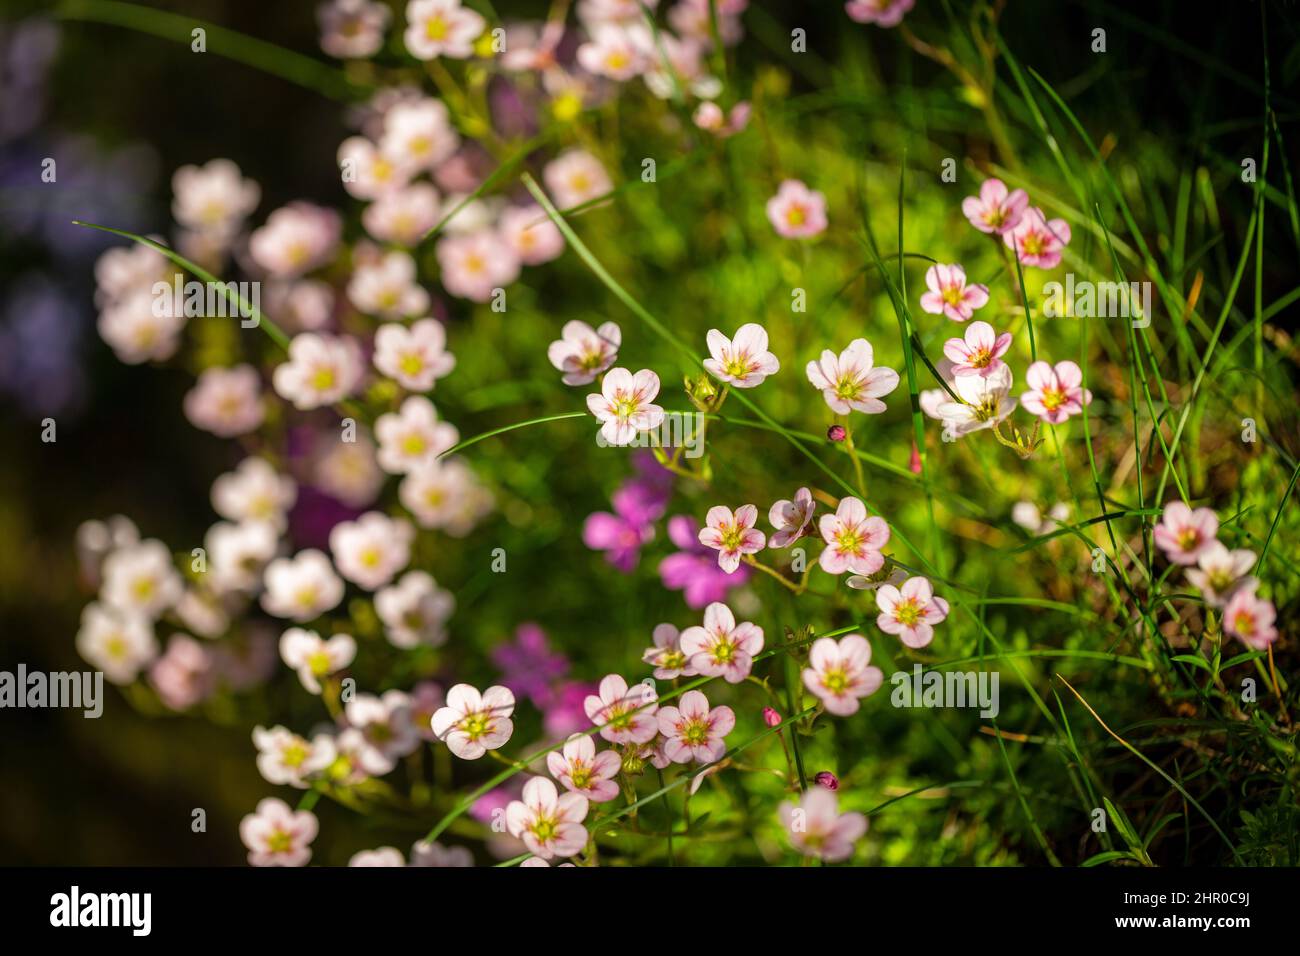 Saxifraga, the stone breaker flowers in the garden. Using shallow depth of field. Stock Photo